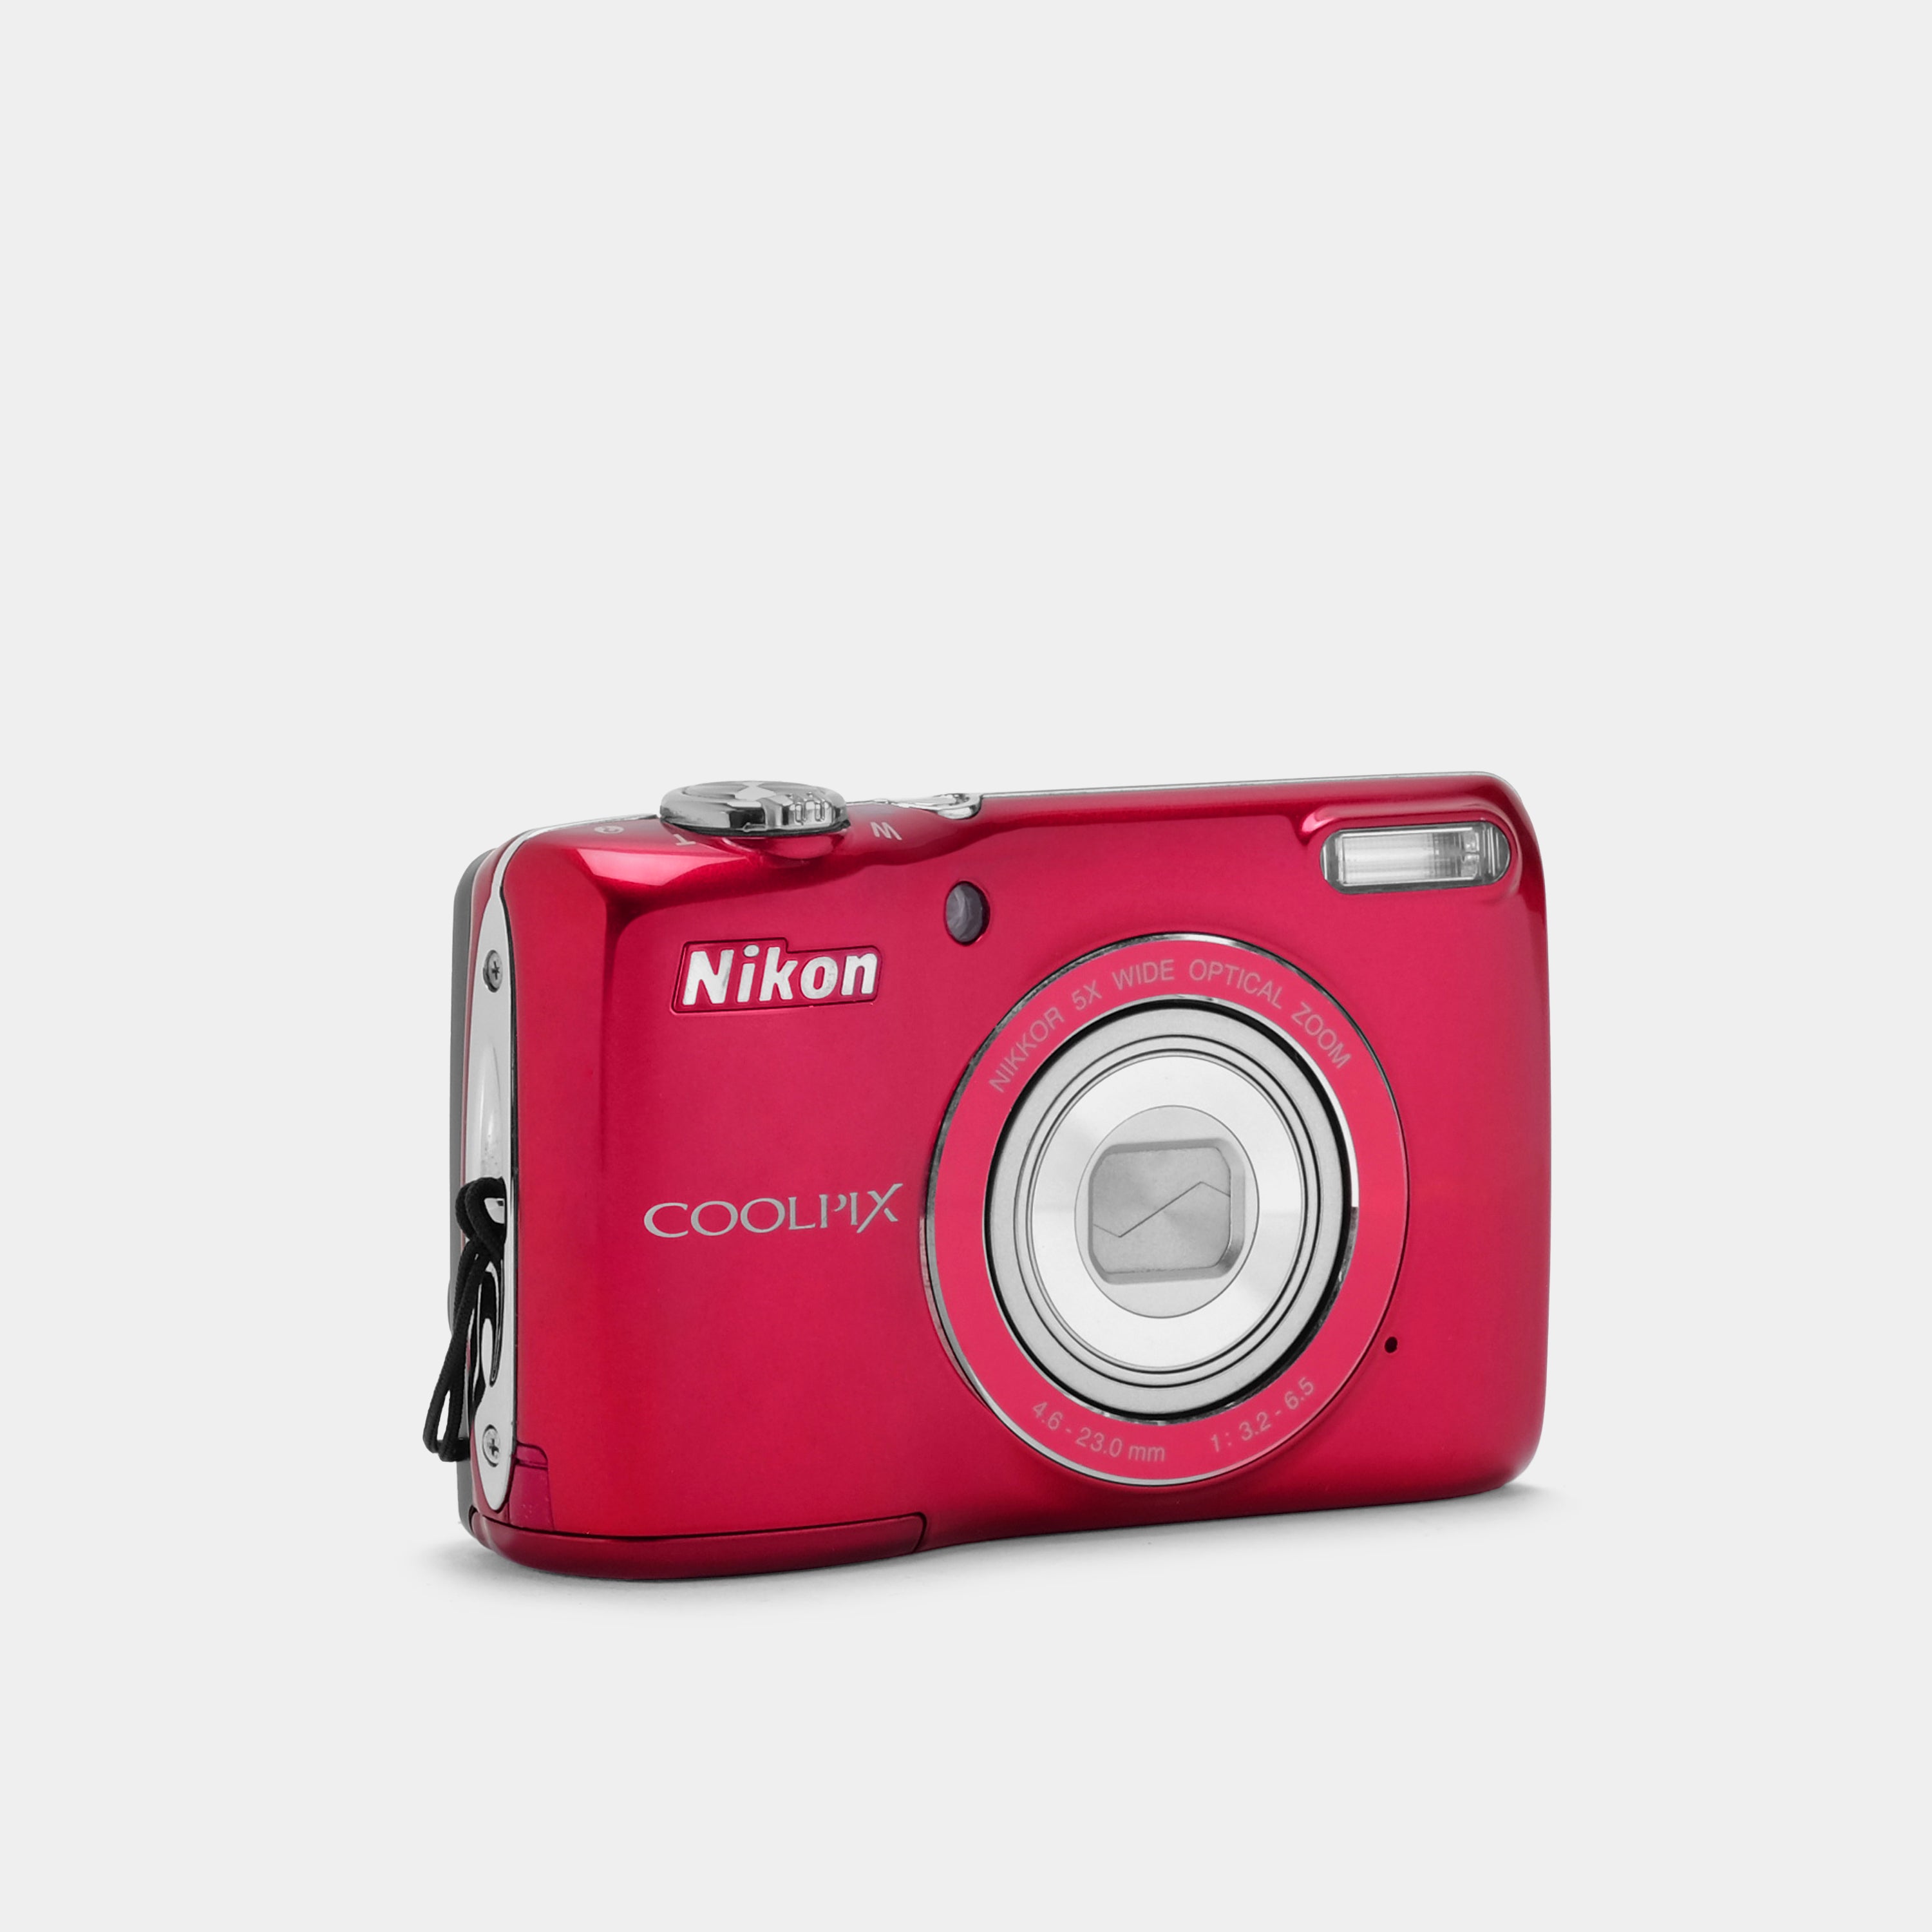 Nikon Coolpix L26 Red Point and Shoot Digital Camera